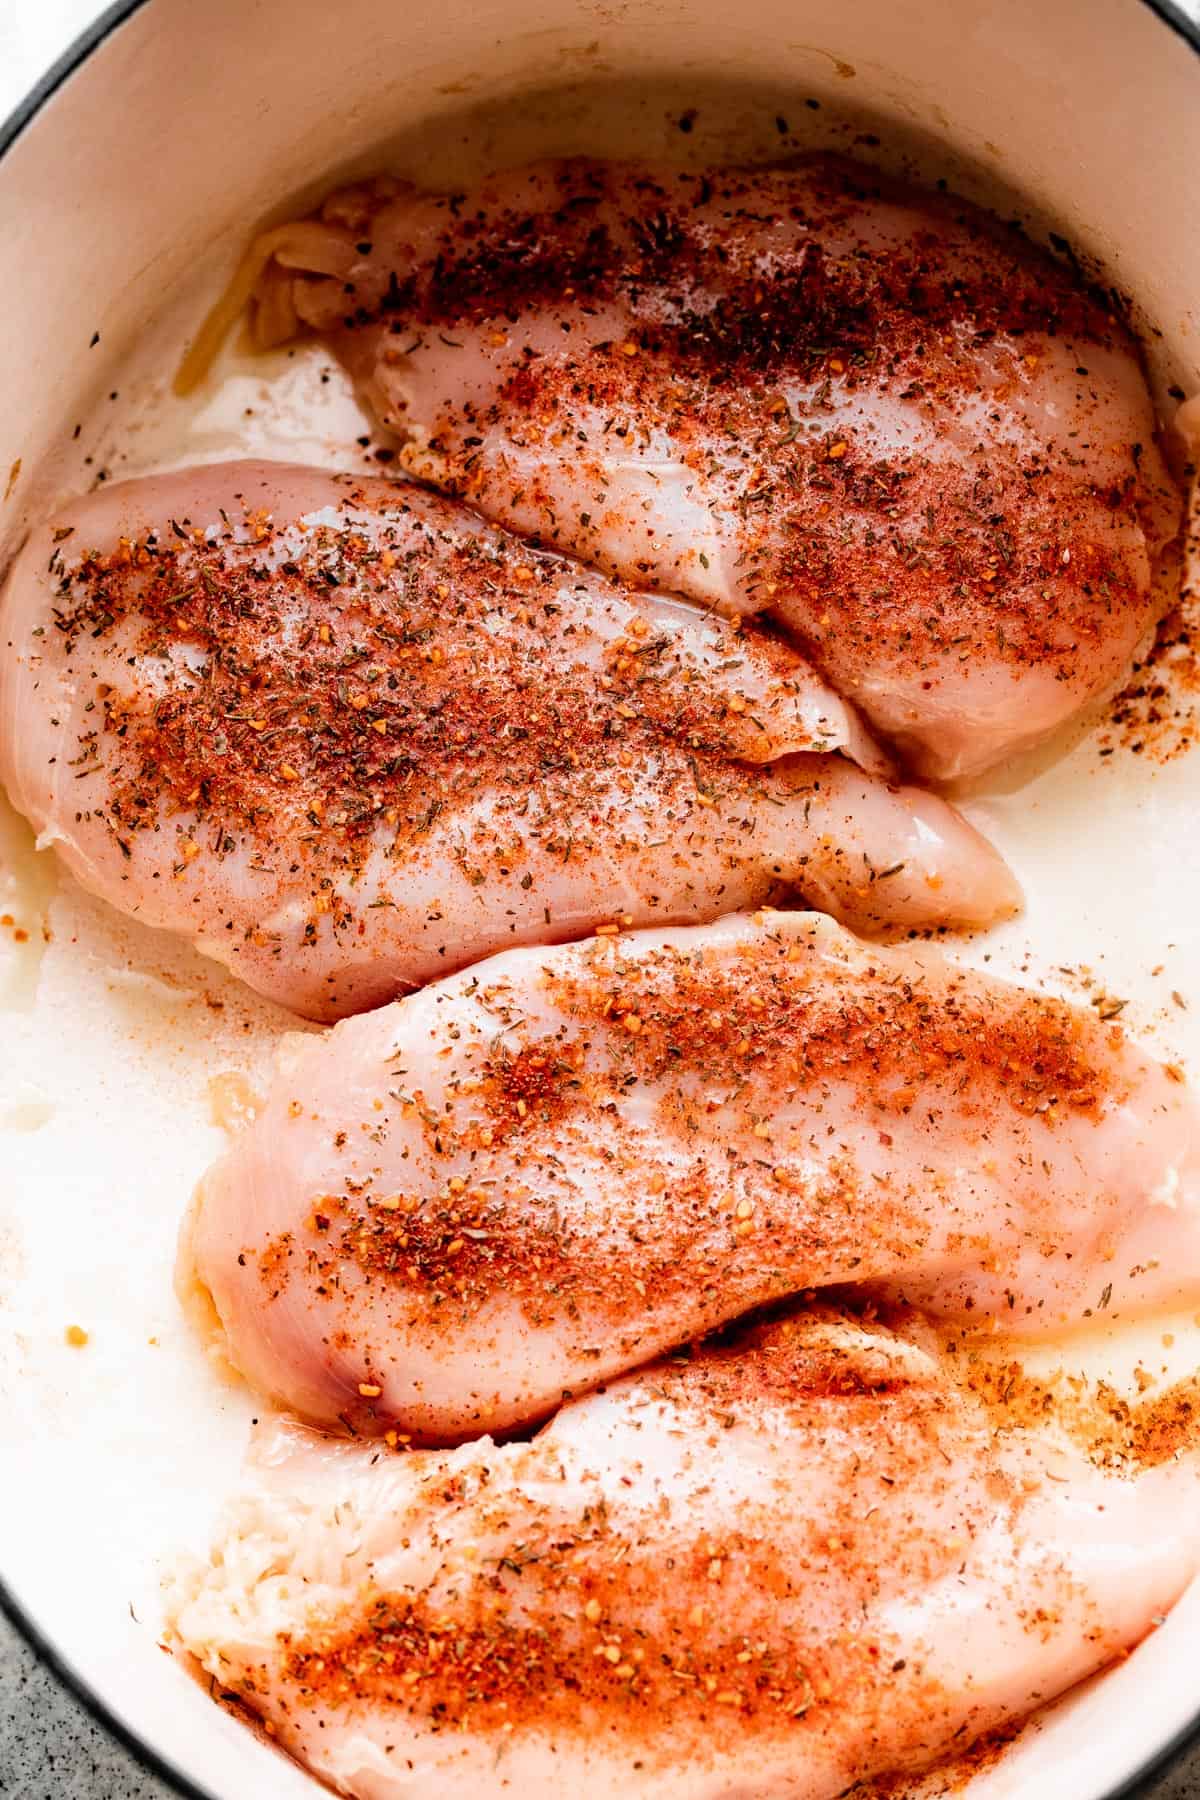 four raw chicken breasts arranged inside a white slow cooker insert.